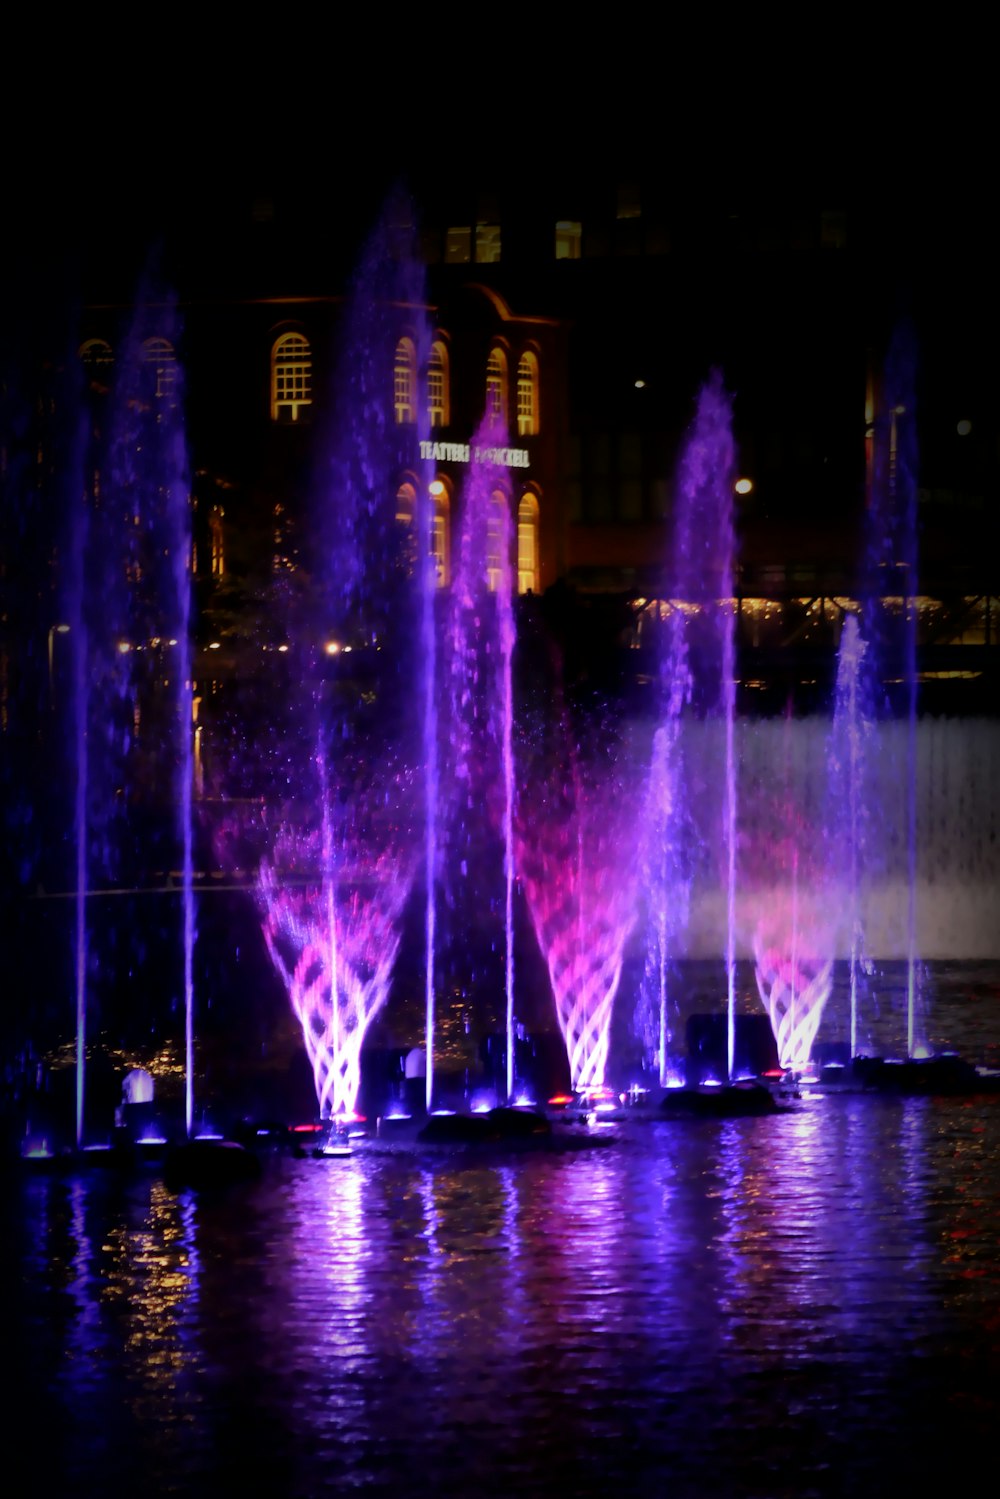 outdoor water fountain during nighttime